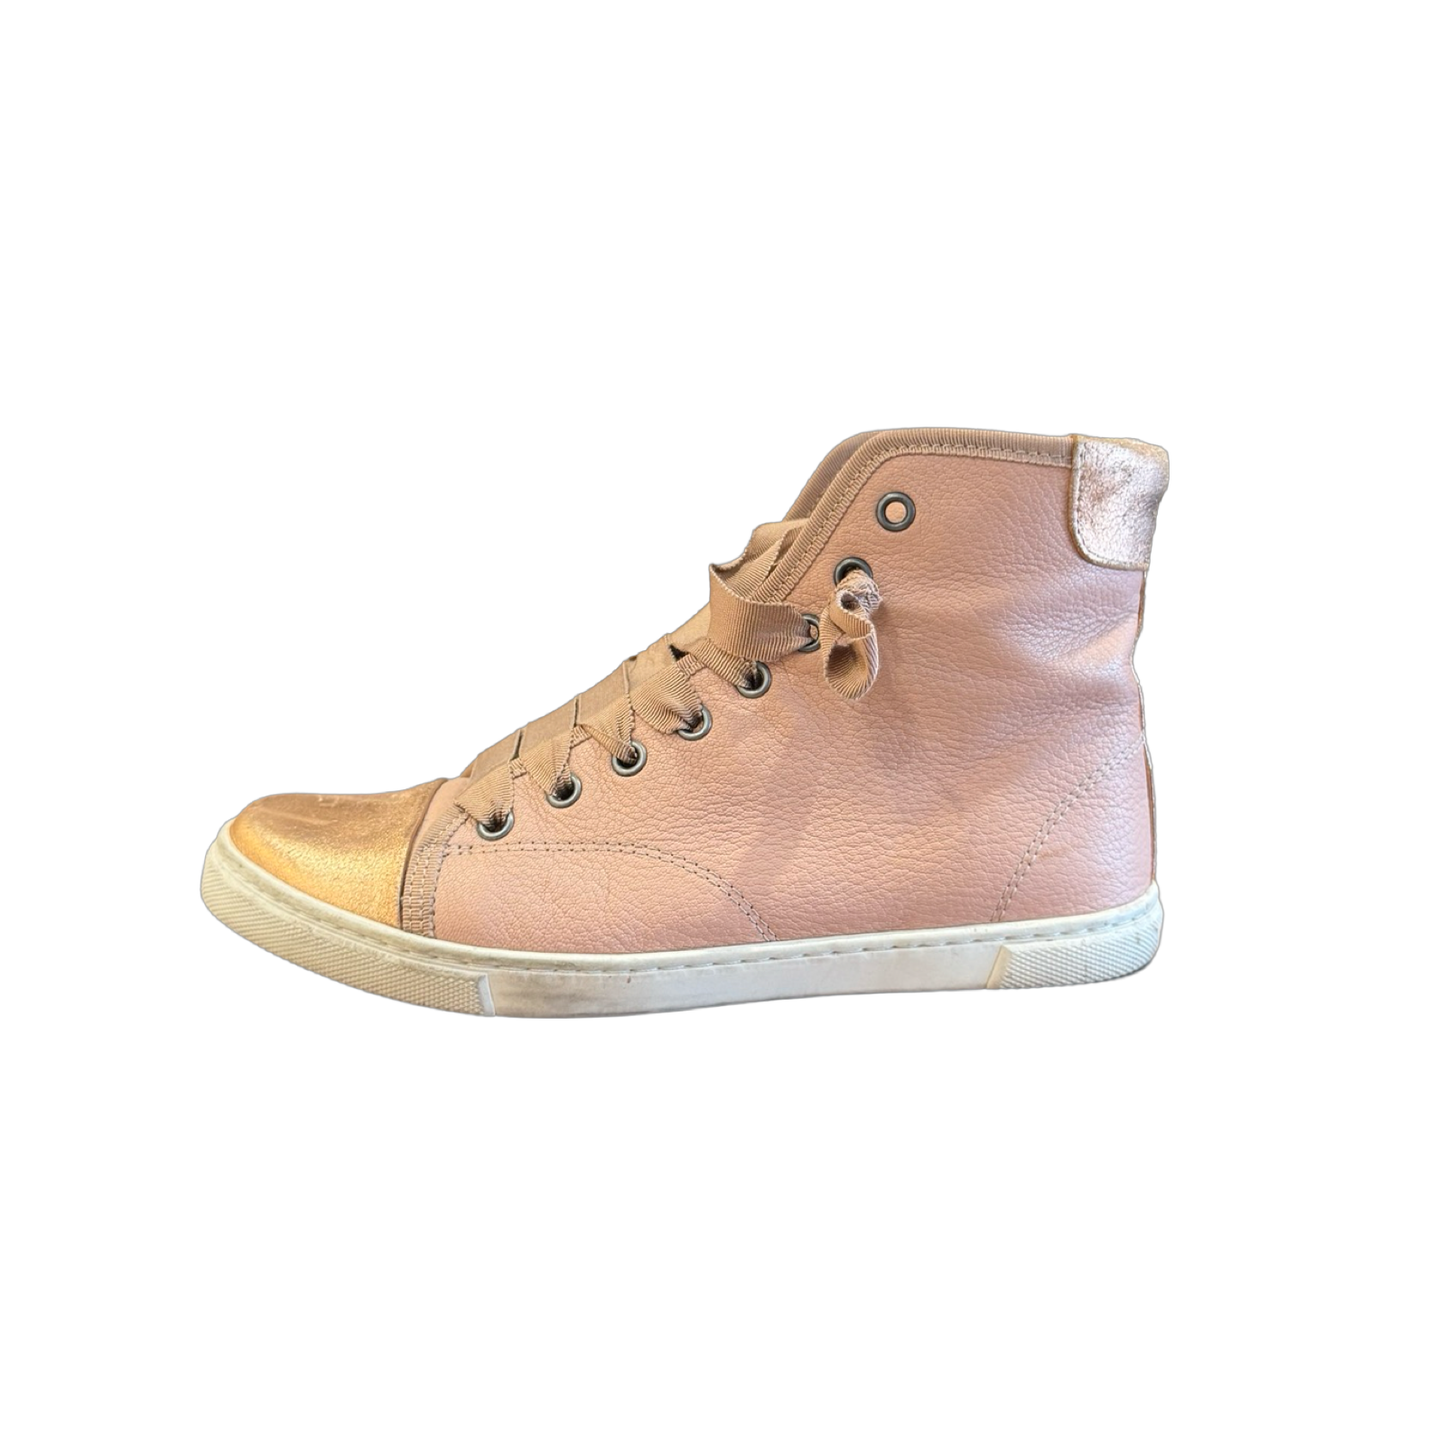 Lanvin Whipstitch High Top Sneakers (Size 36)